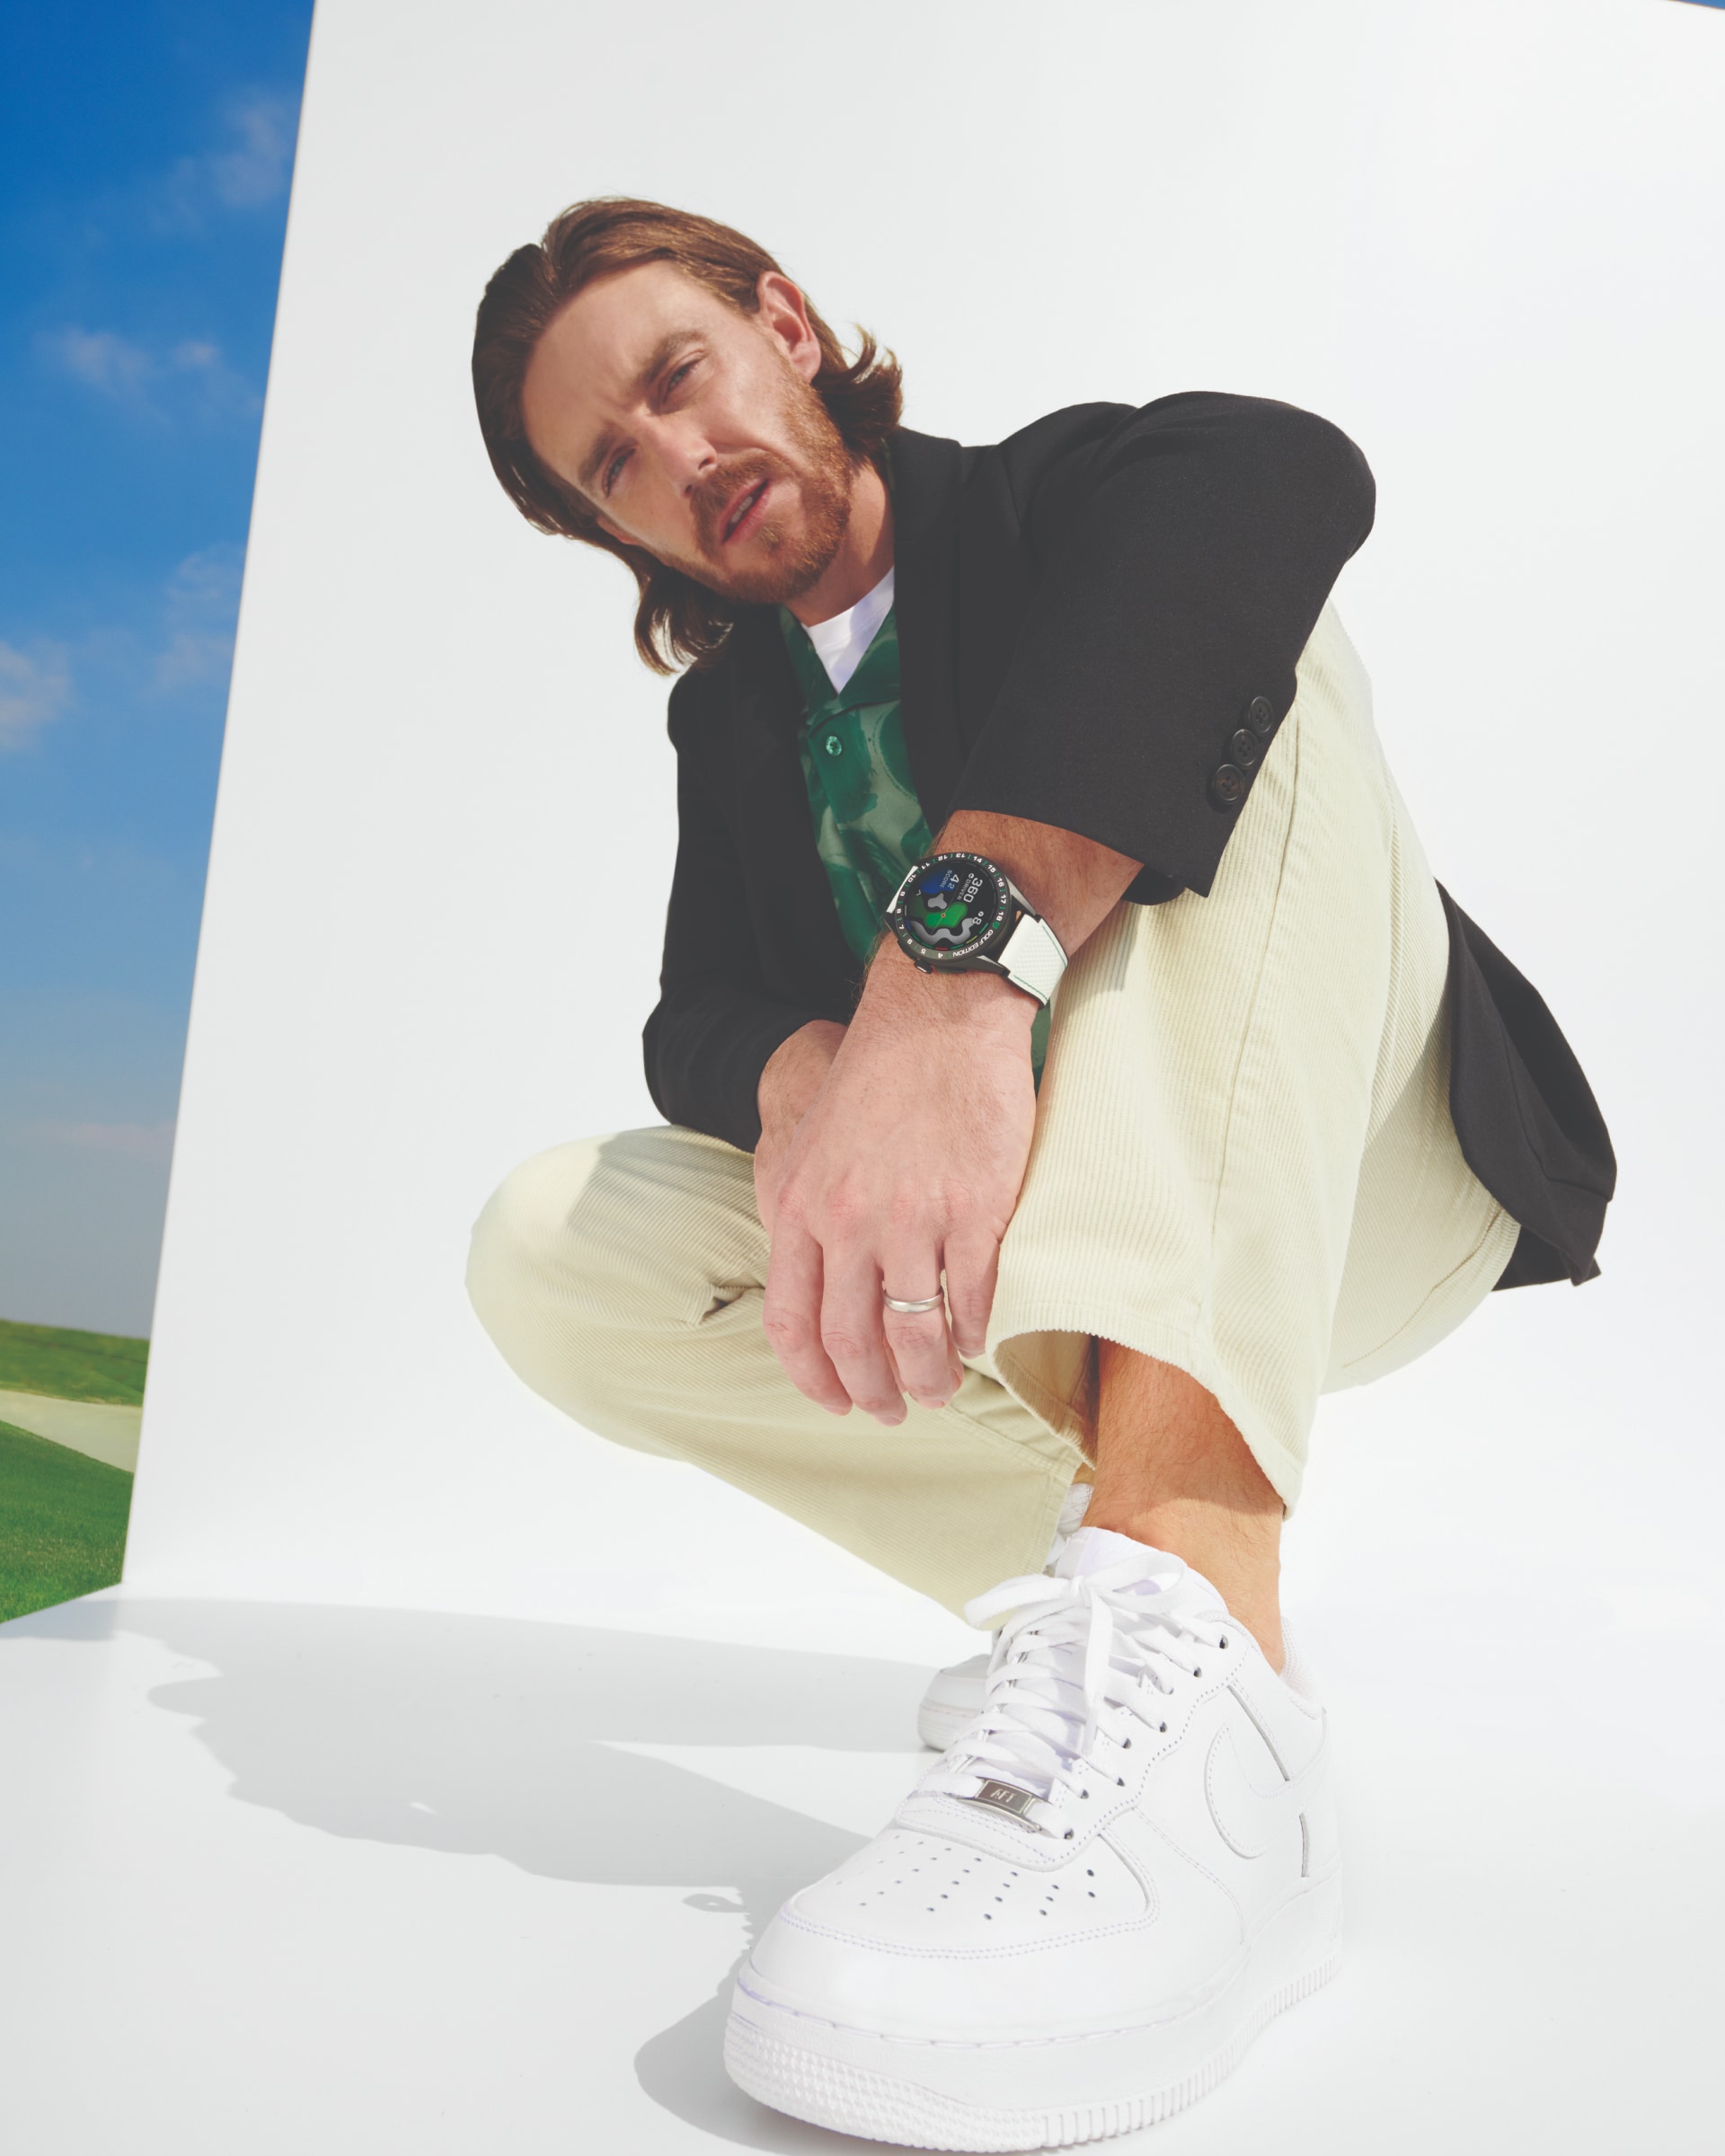 TAG HEUER TOMMY FLEETWOOD